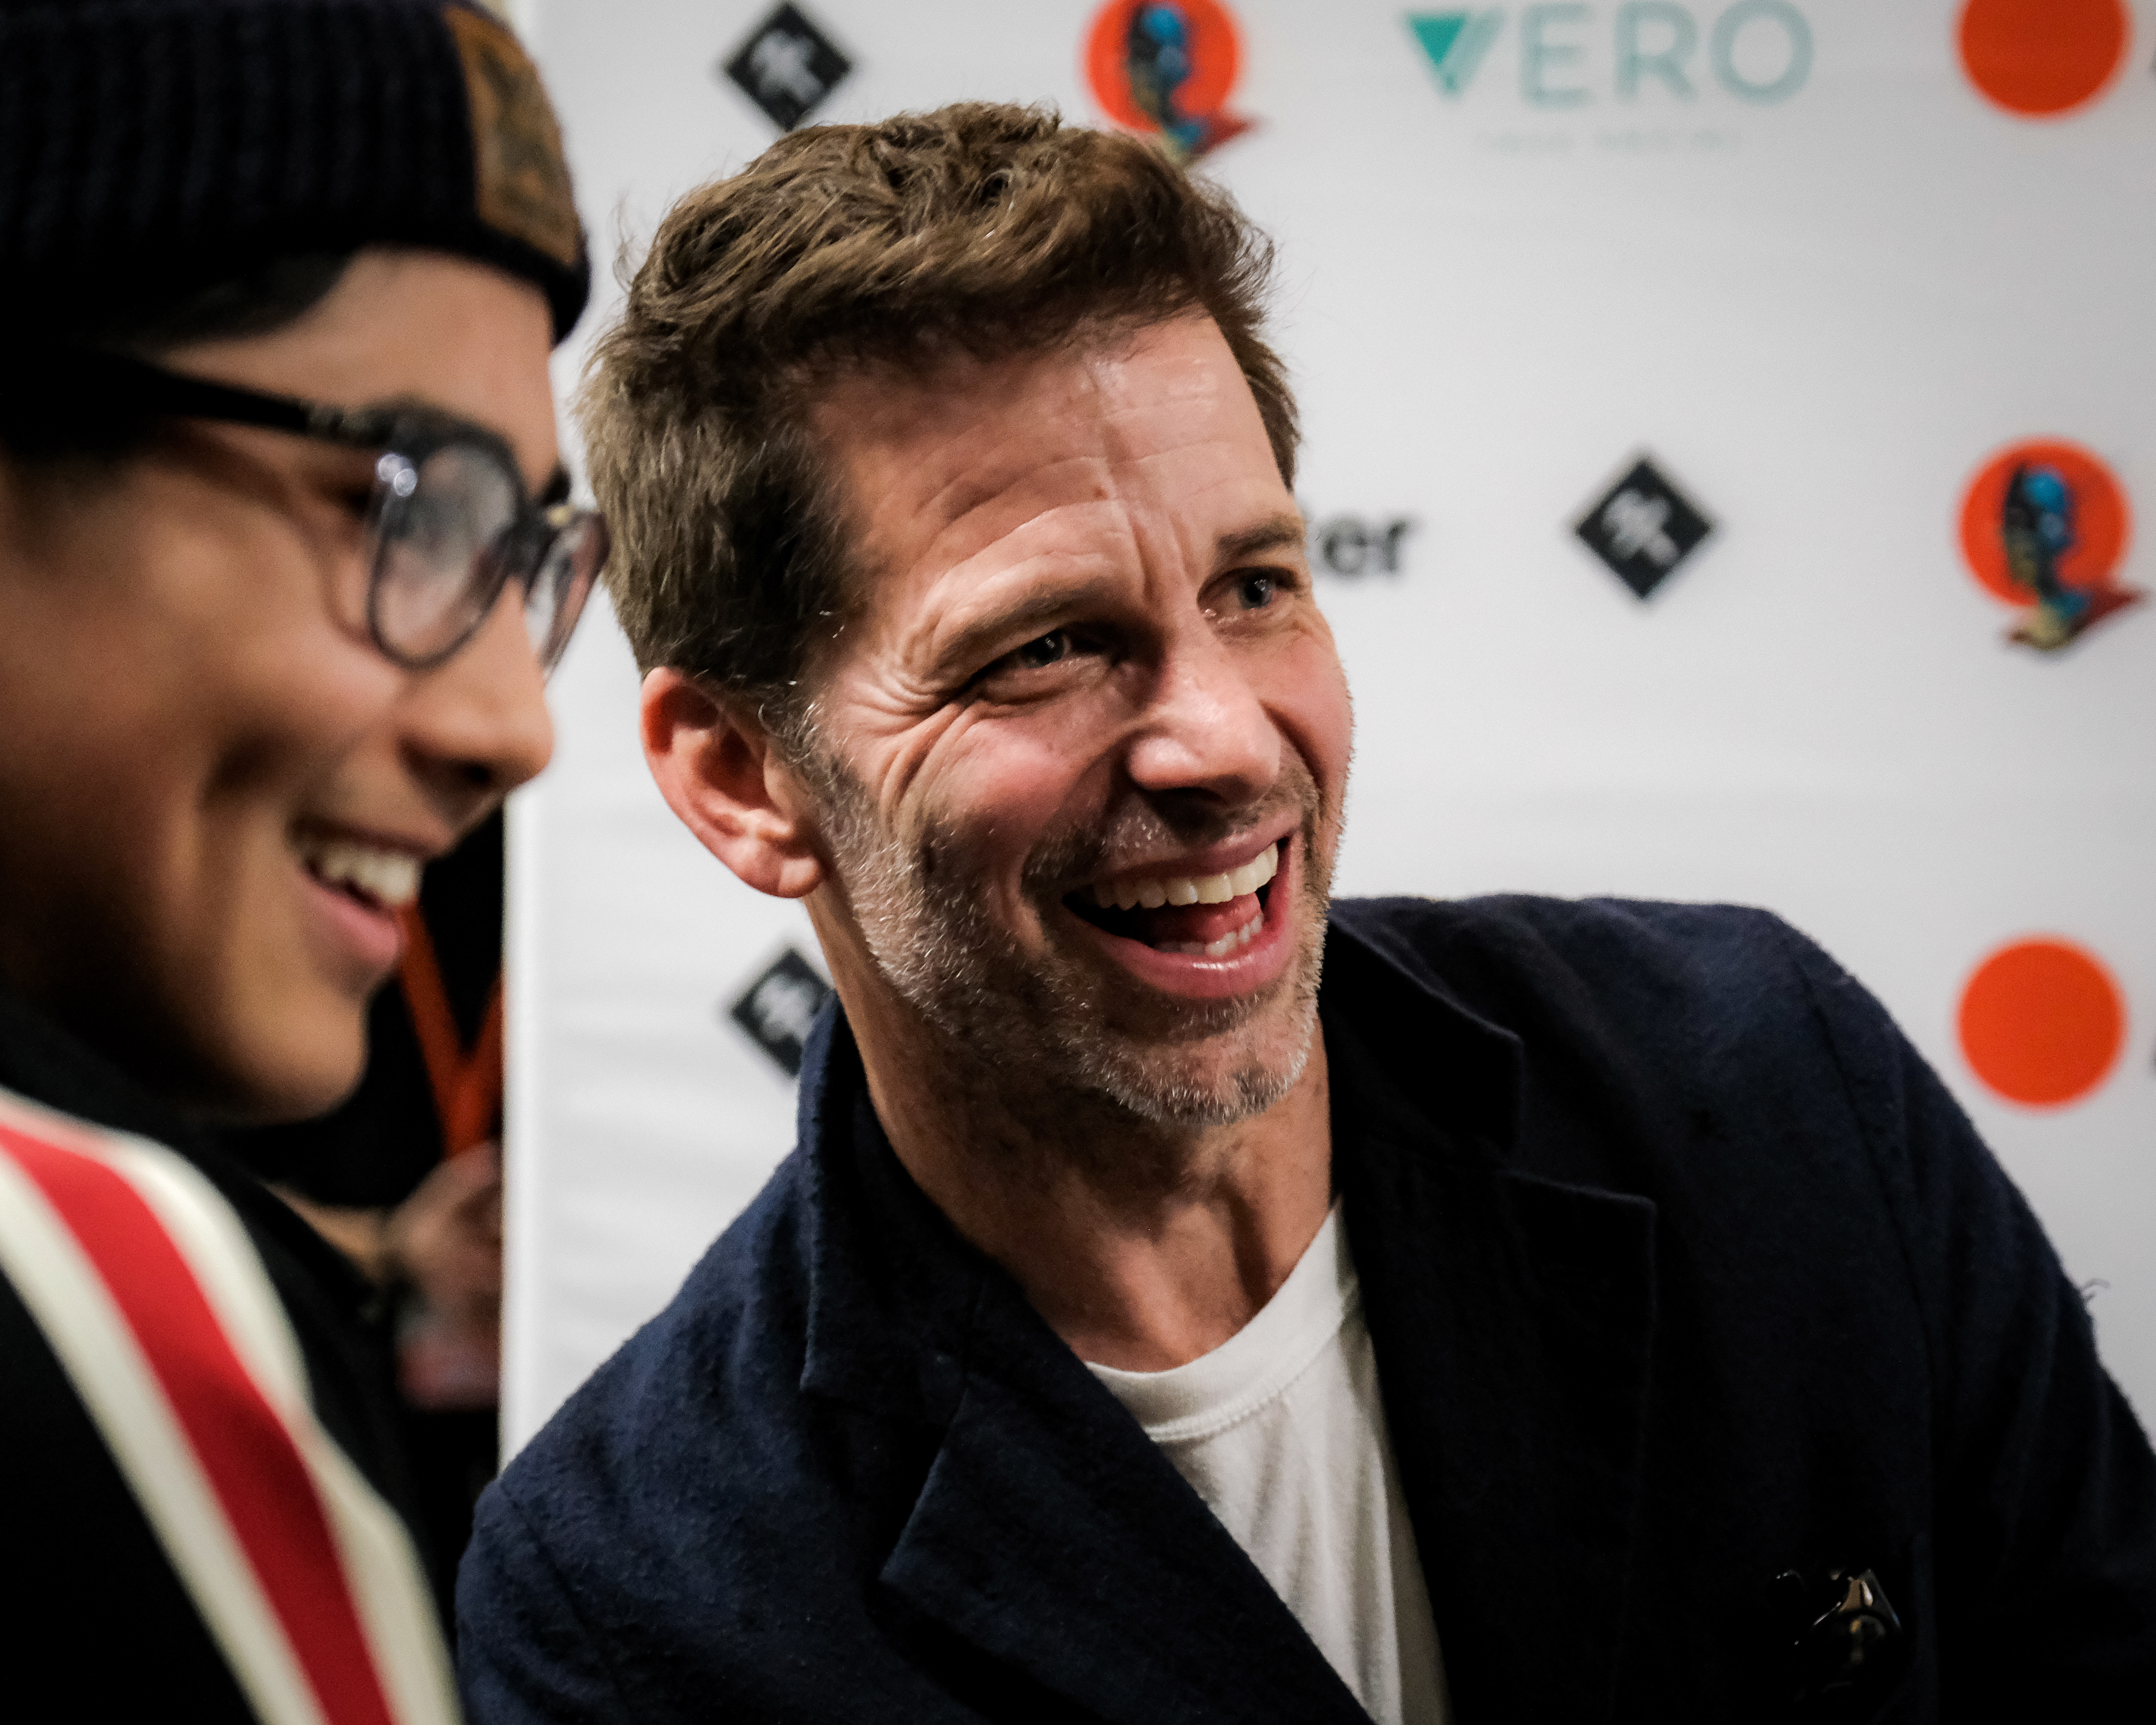 Image of Zack Snyder with an ArtCenter student at a movie marathon in 2019.